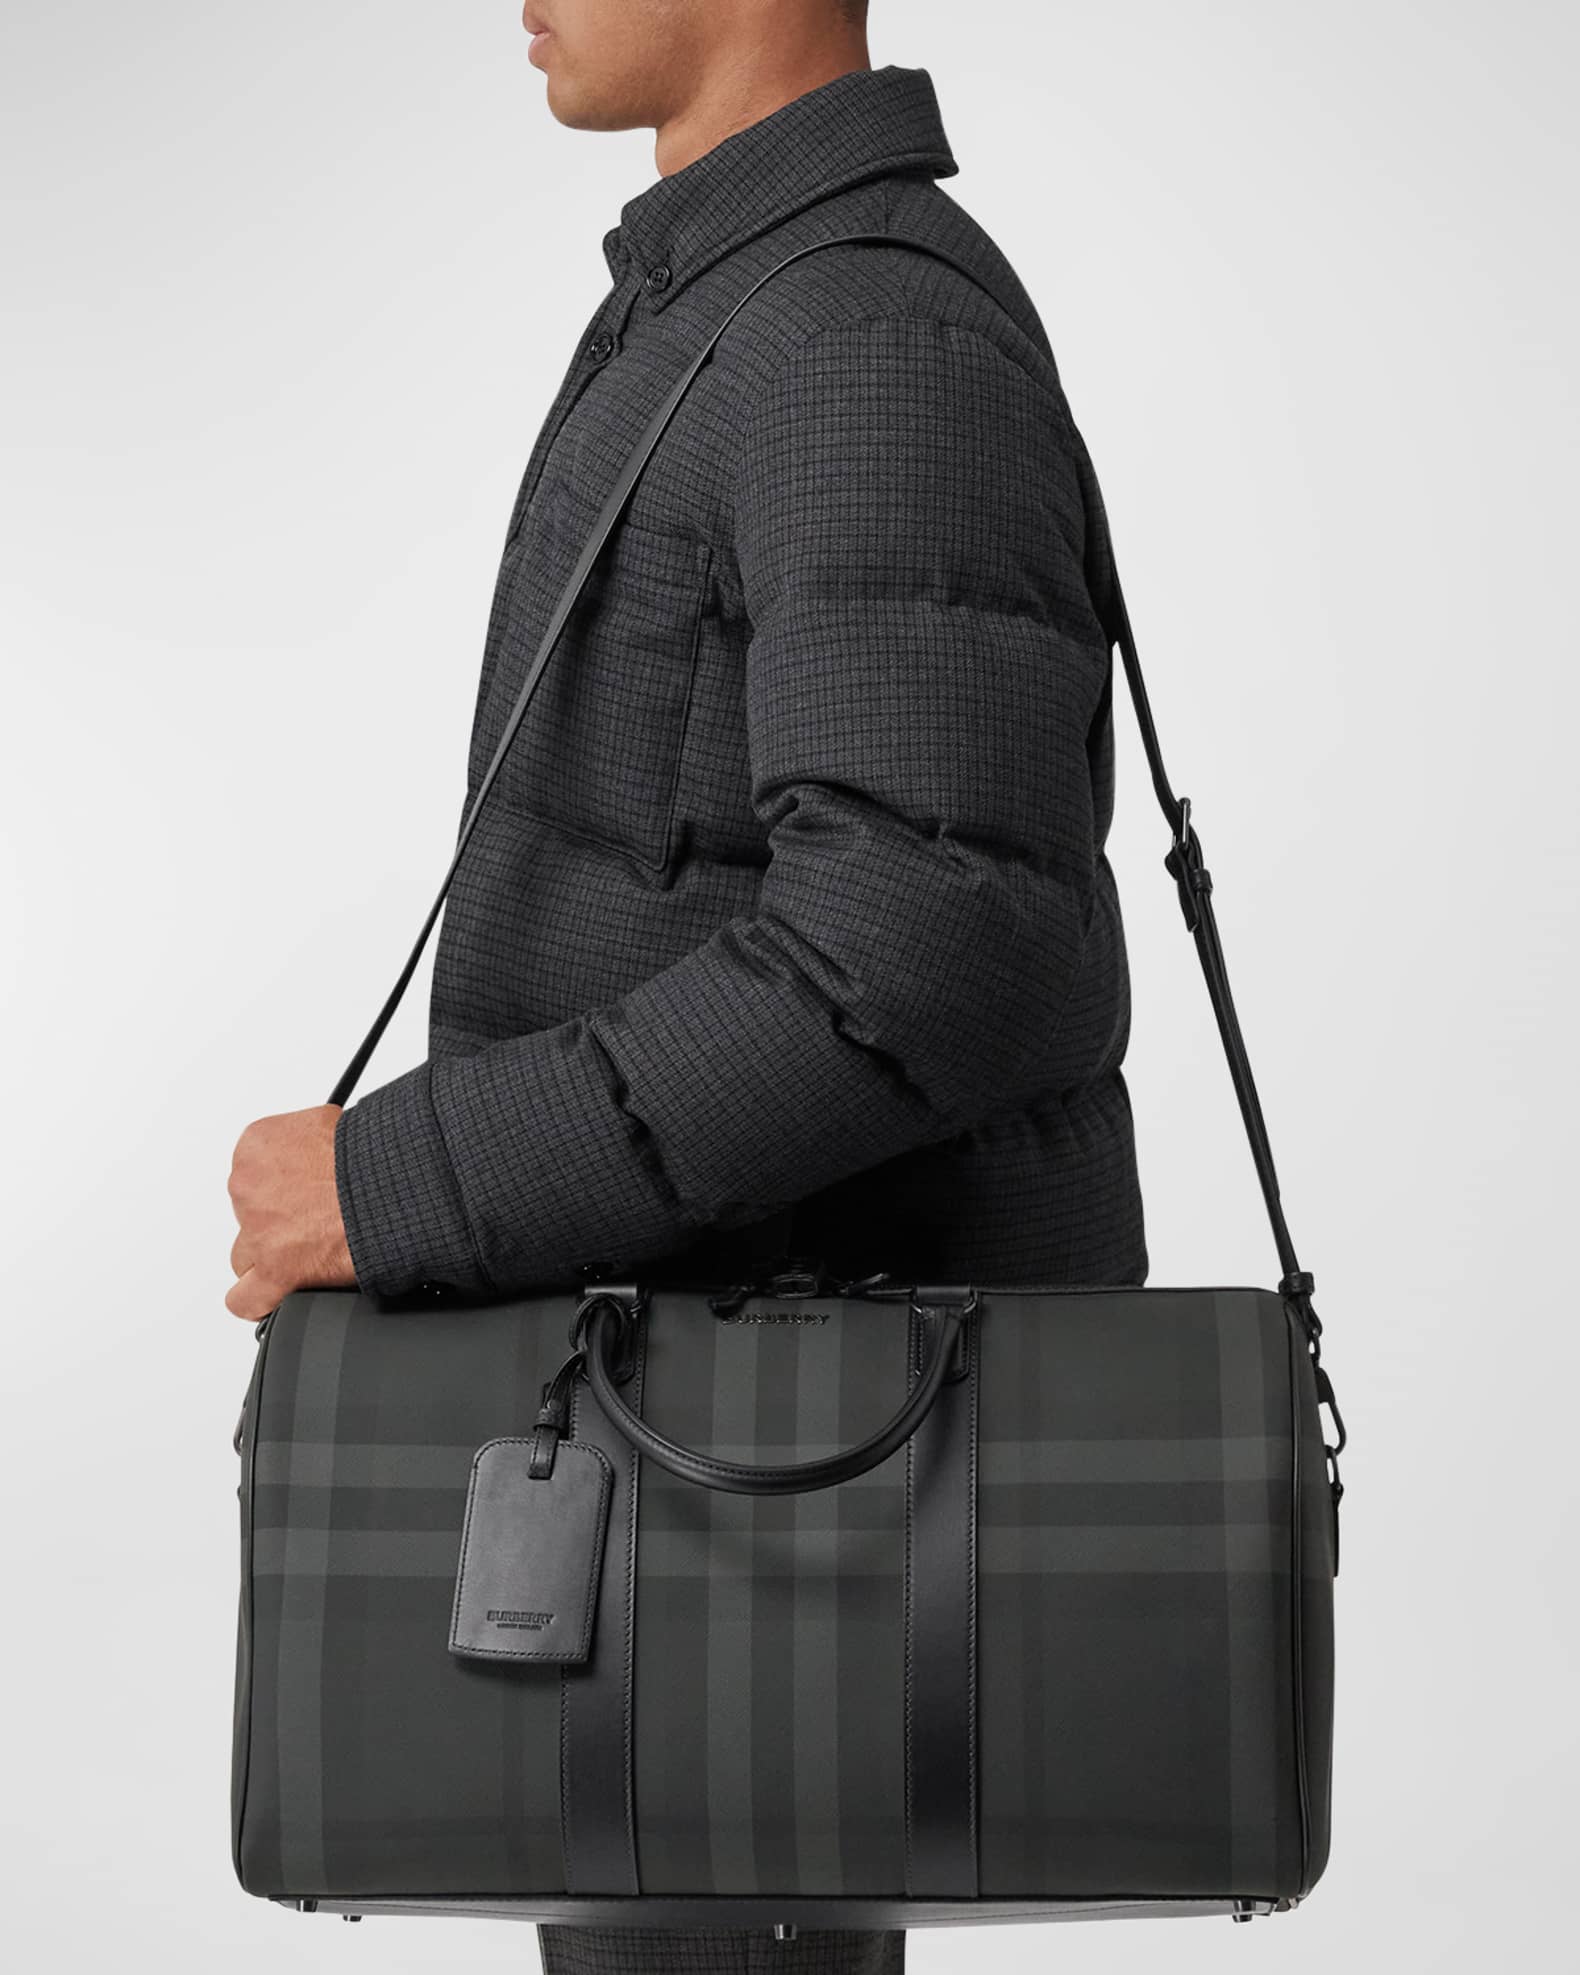 Burberry Men's Charcoal Check Holdall Duffel Bag | Marcus